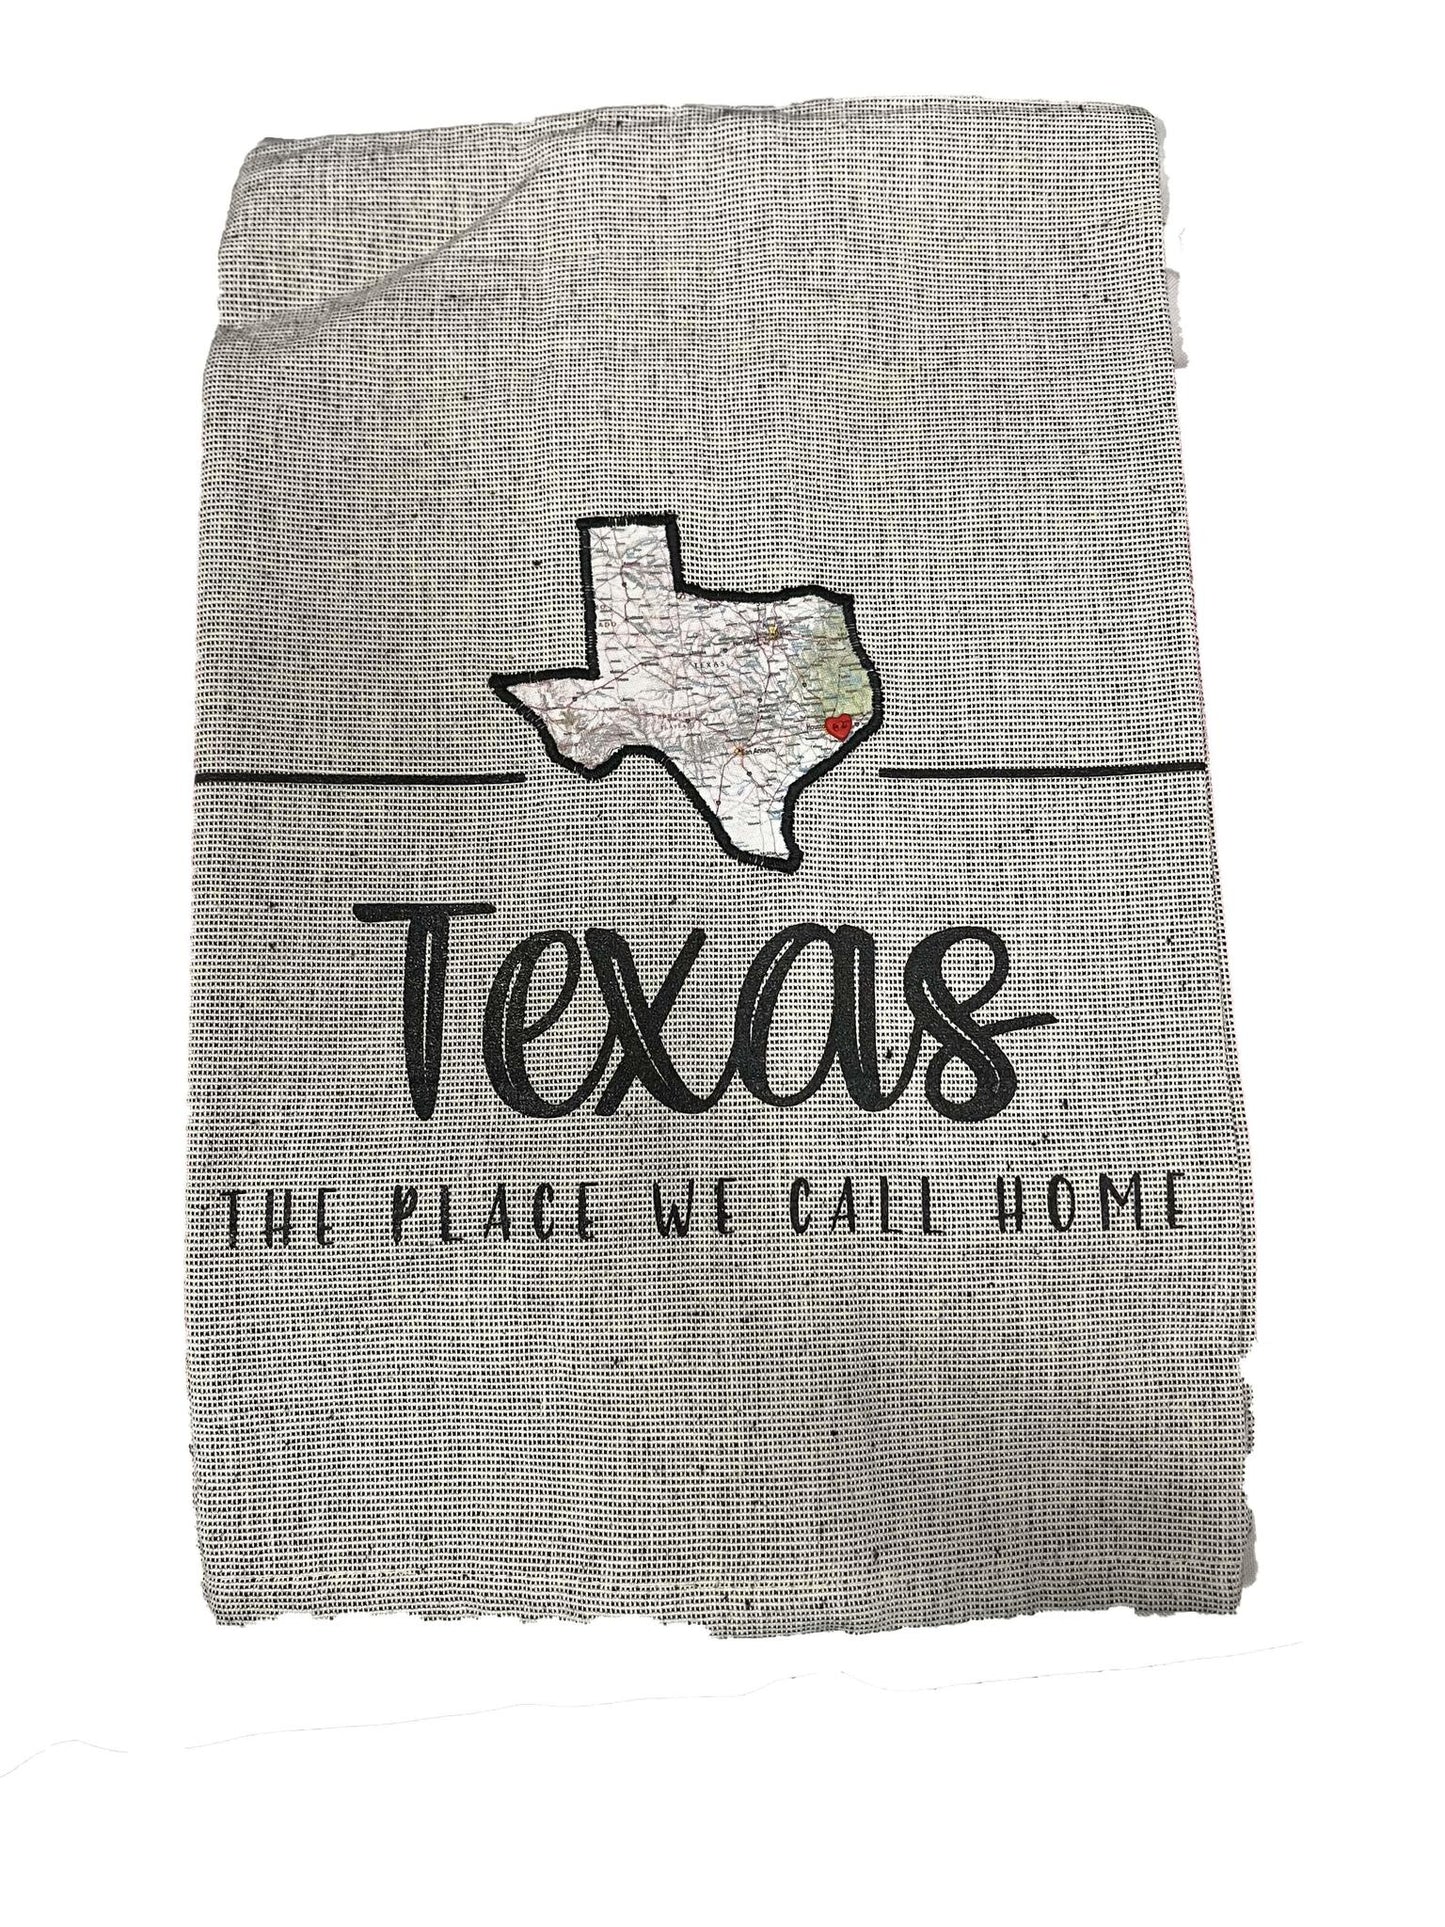 Texas The Place We Call Home Dish Towel